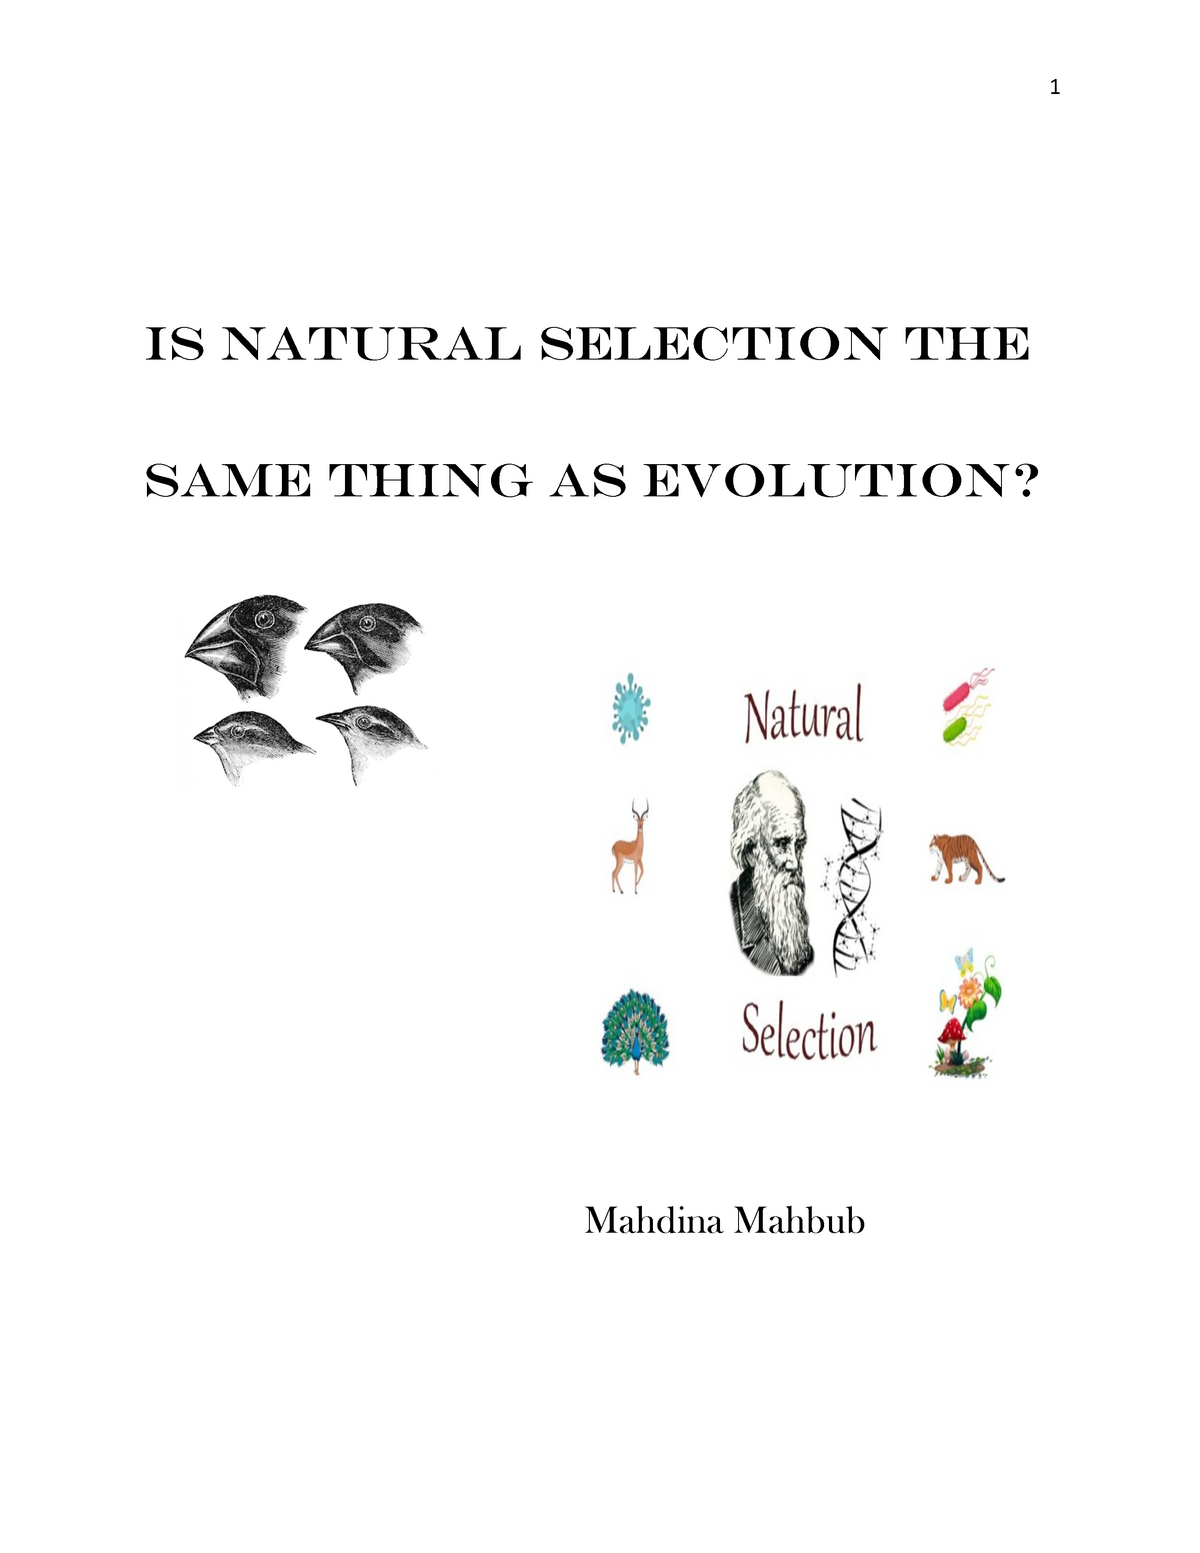 Misconception about natural selection and evolution Is natural